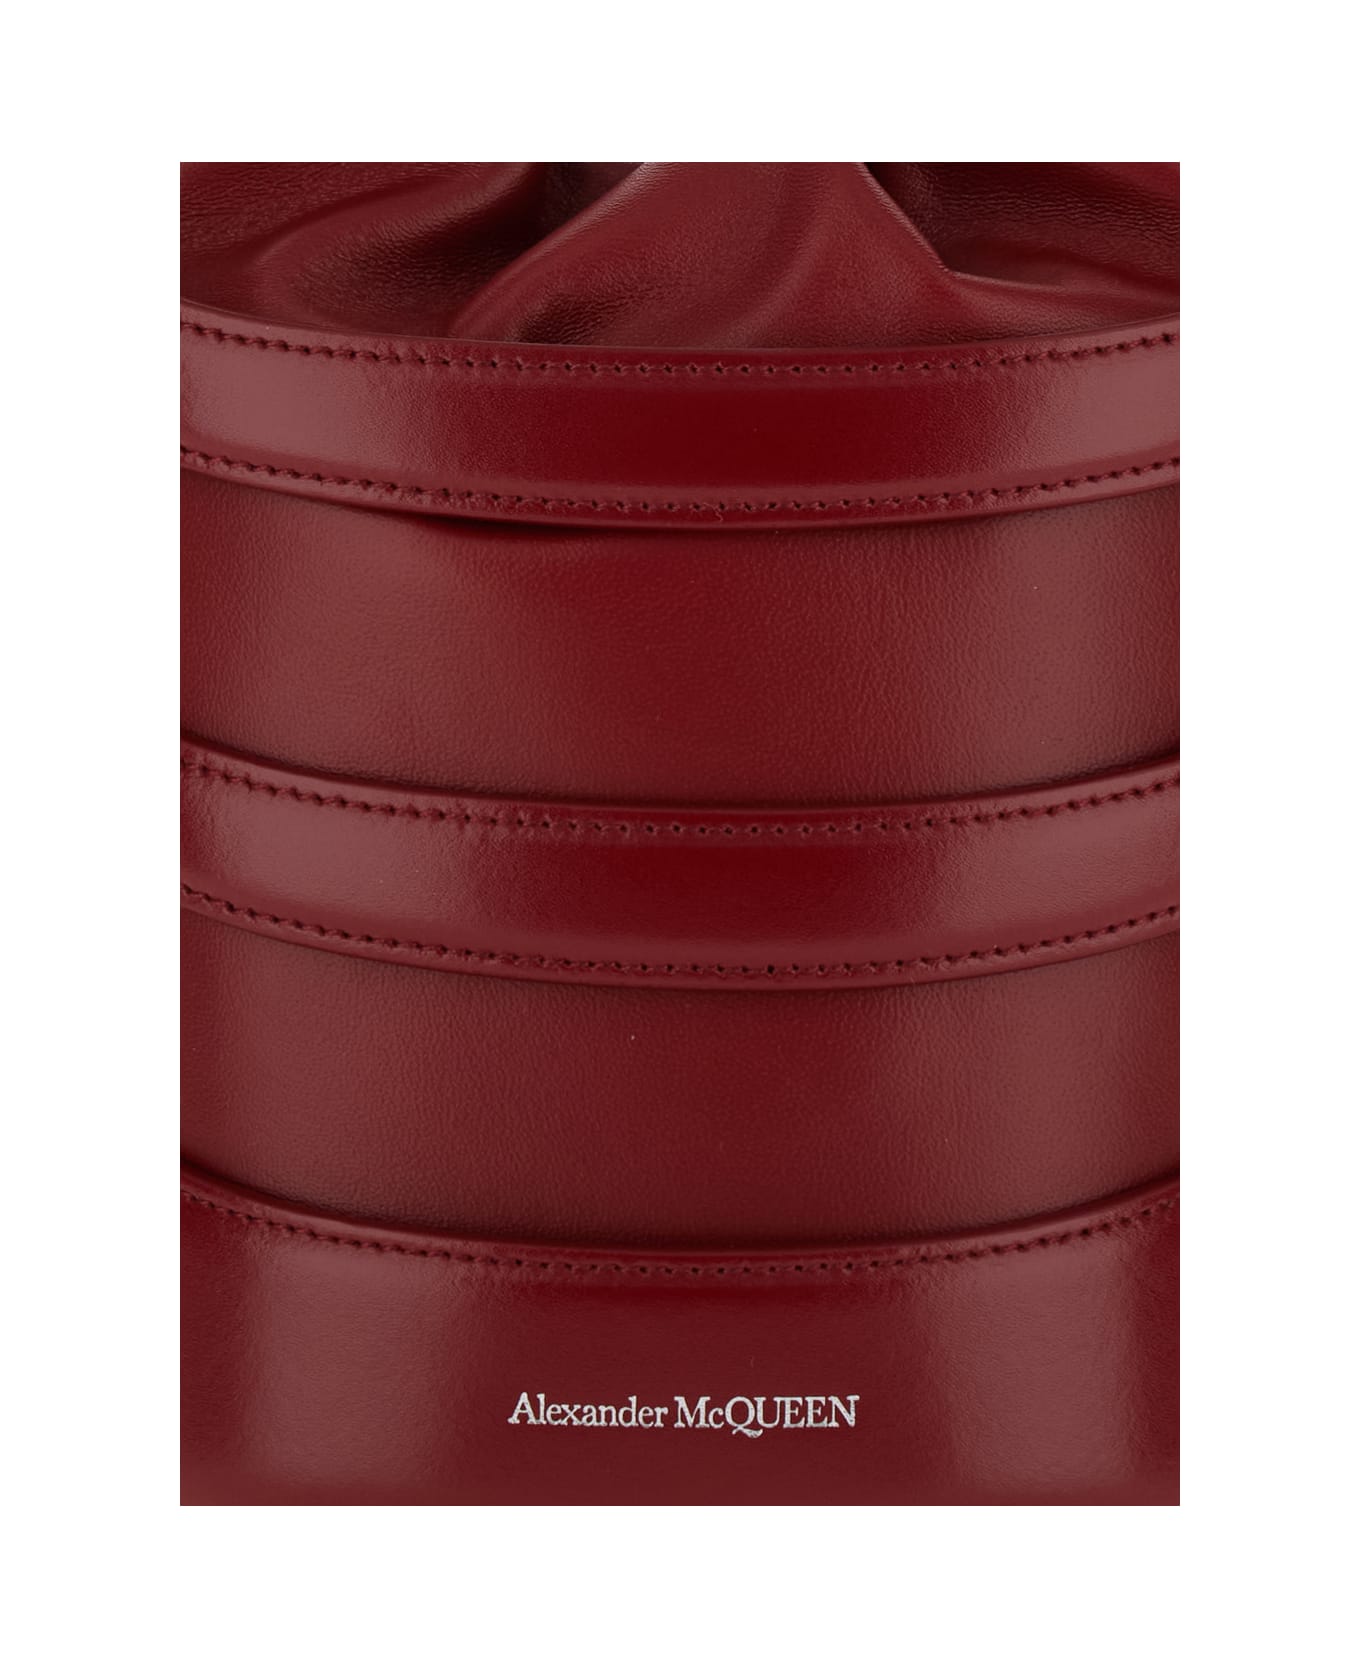 Alexander McQueen 'the Rise' Bordeaux Bucket Bag With Harness Cage In Leather Woman - Red